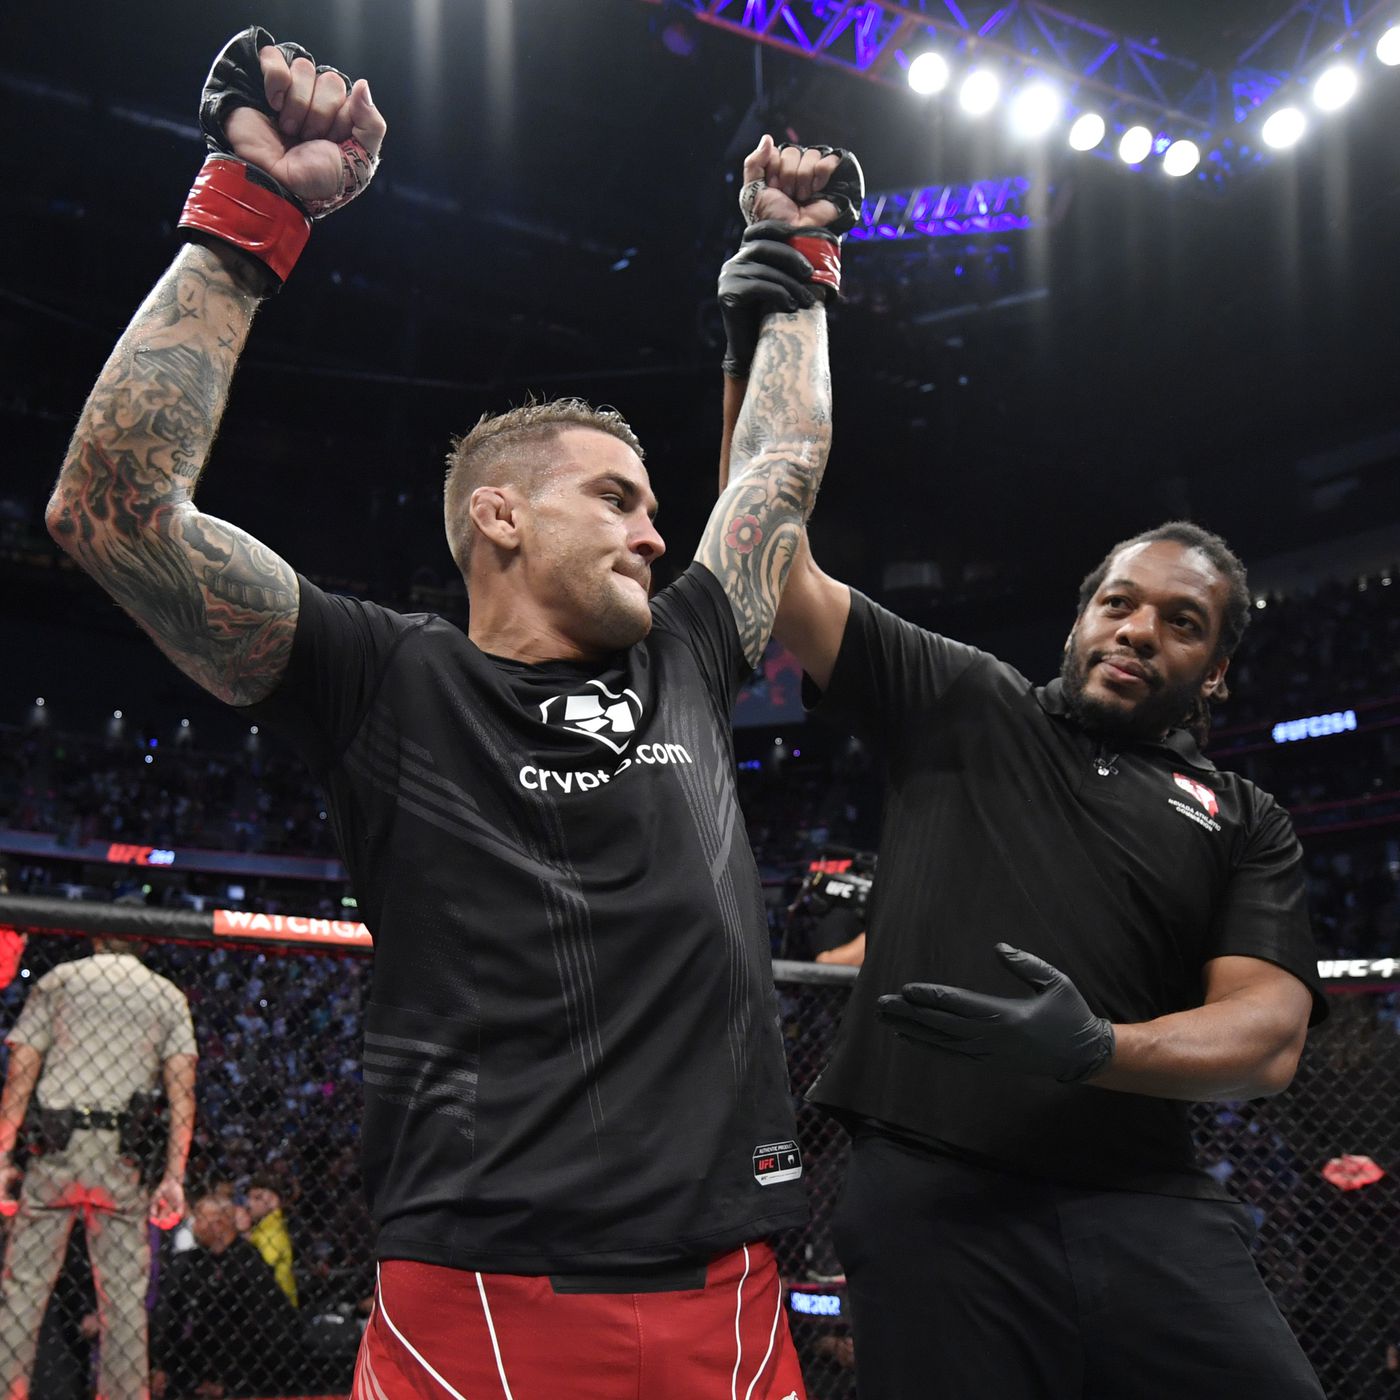 Dustin Poirier responds to Conor McGregor questioning win: 'There were a lot of excuses in the last one too' - MMA Fighting